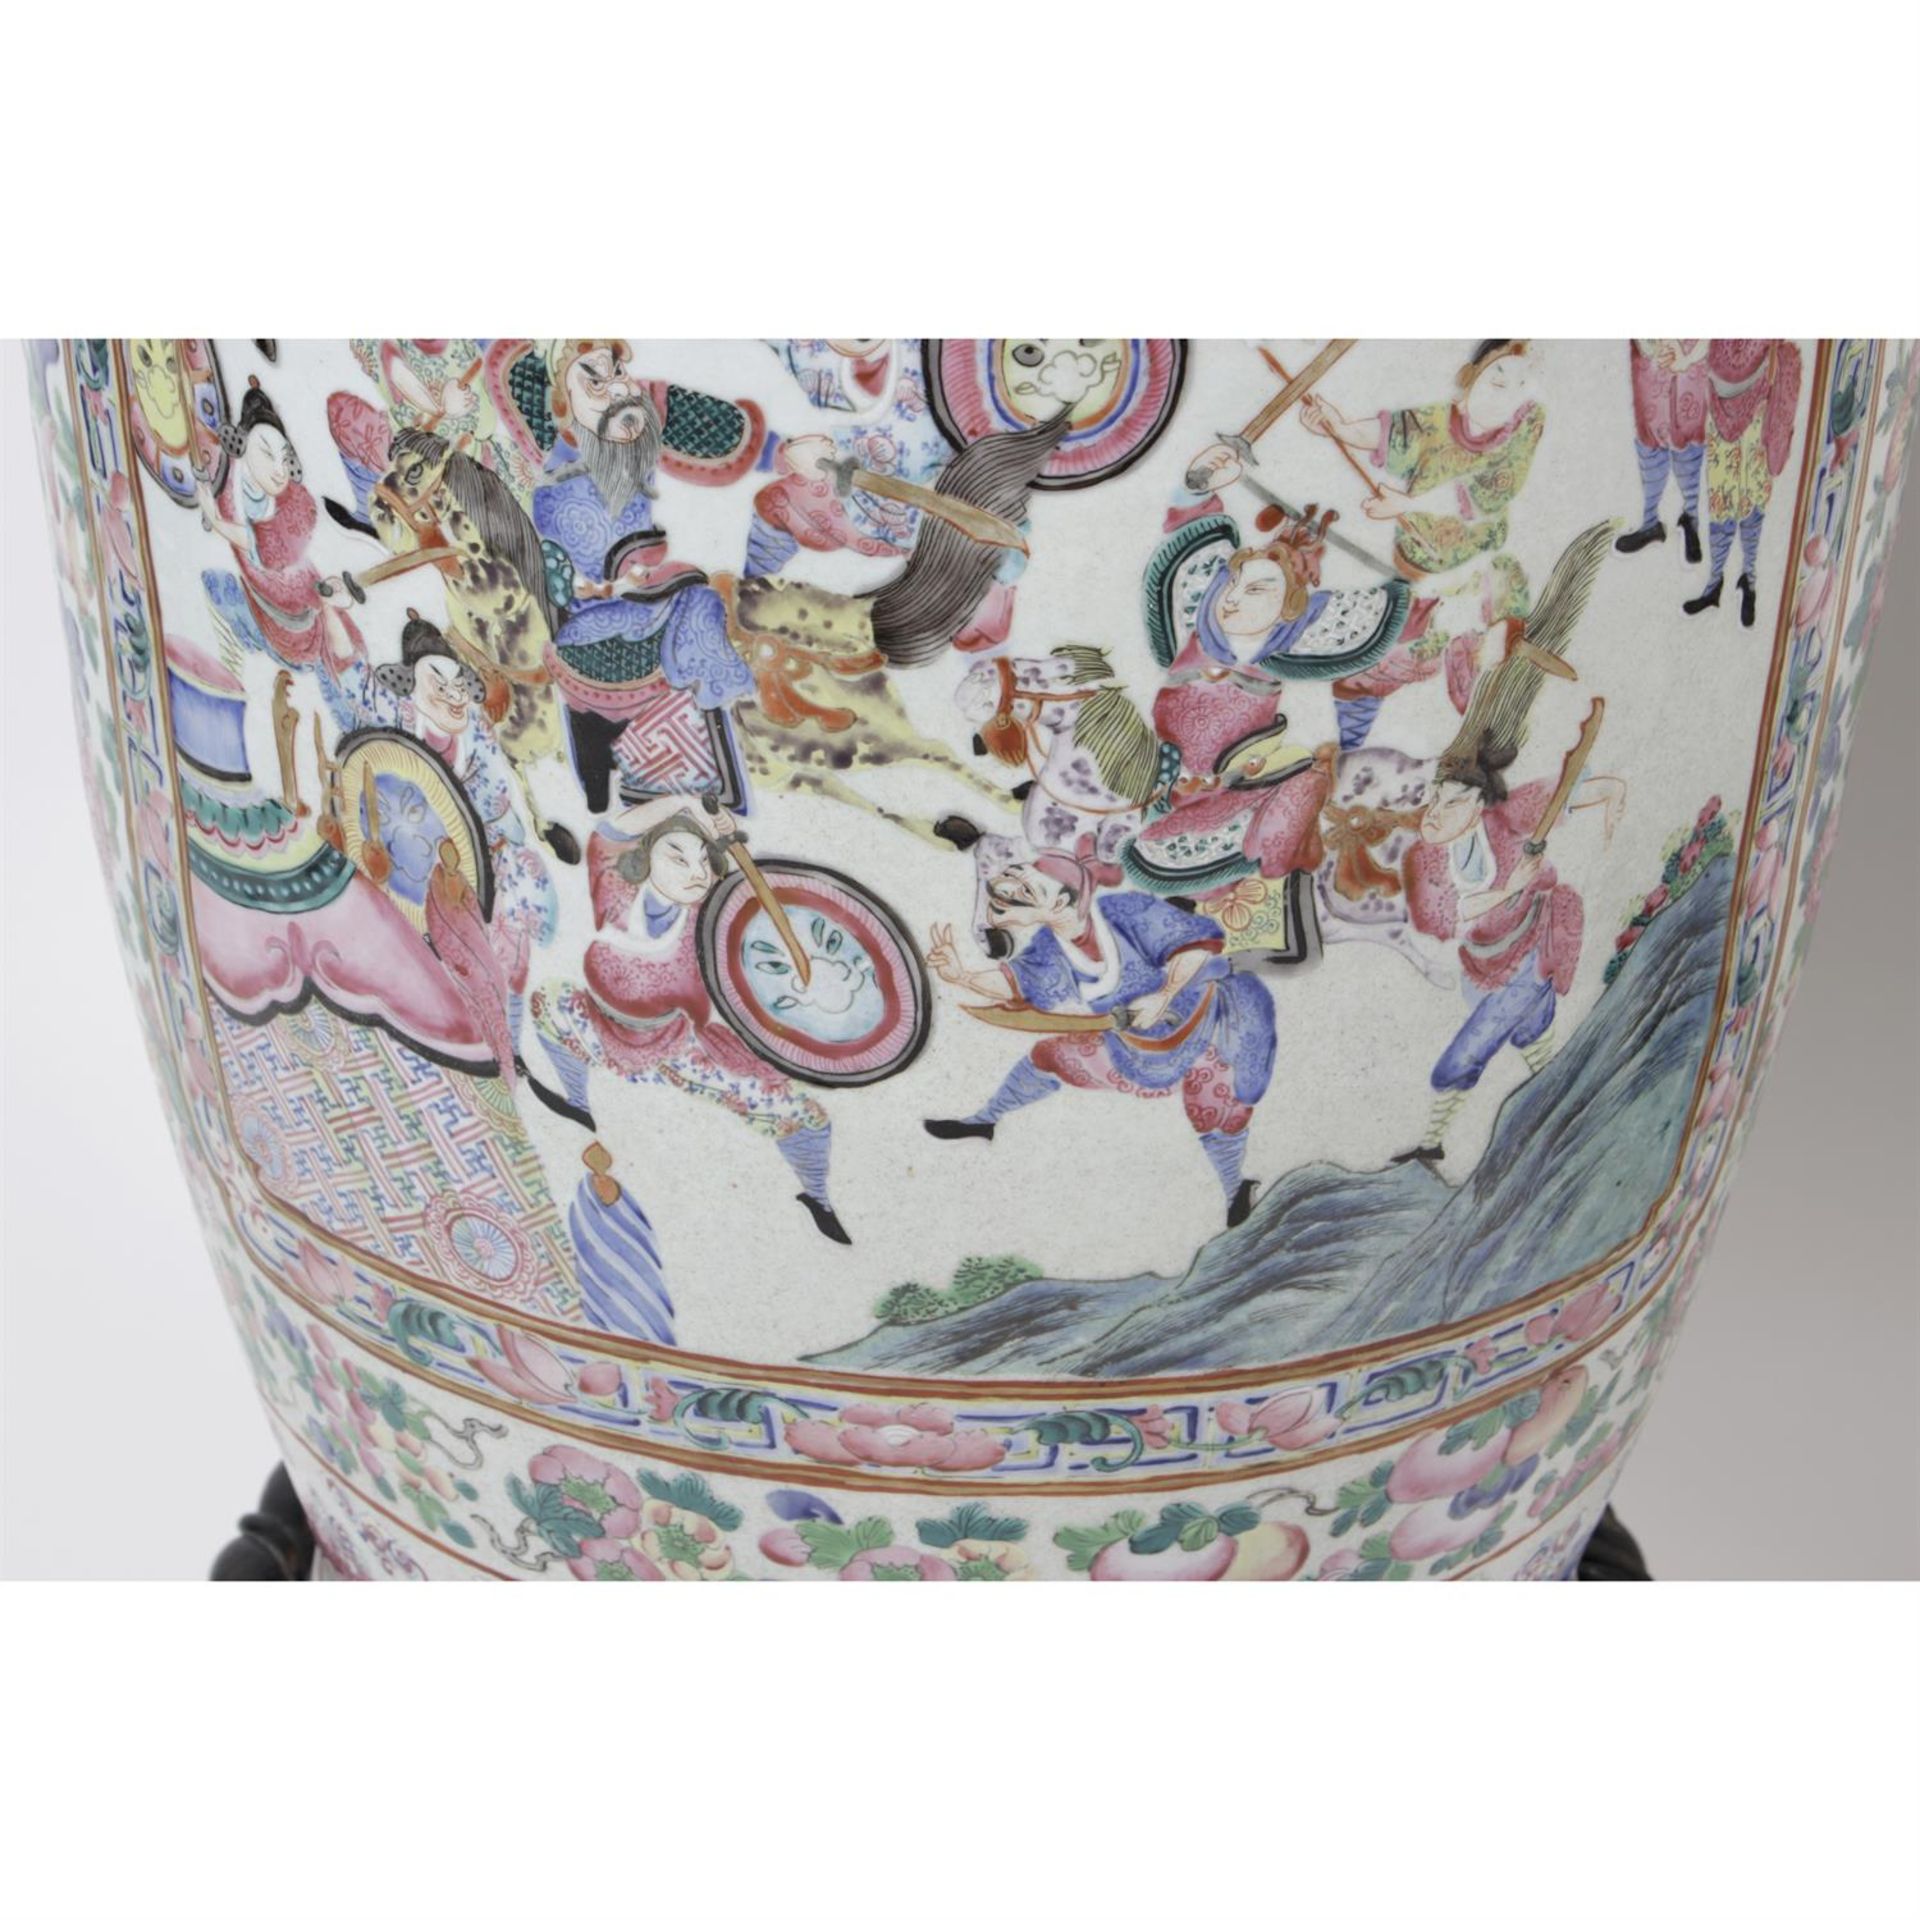 A pair of impressive, large mid-19th century Cantonese porcelain vases. - Image 7 of 20